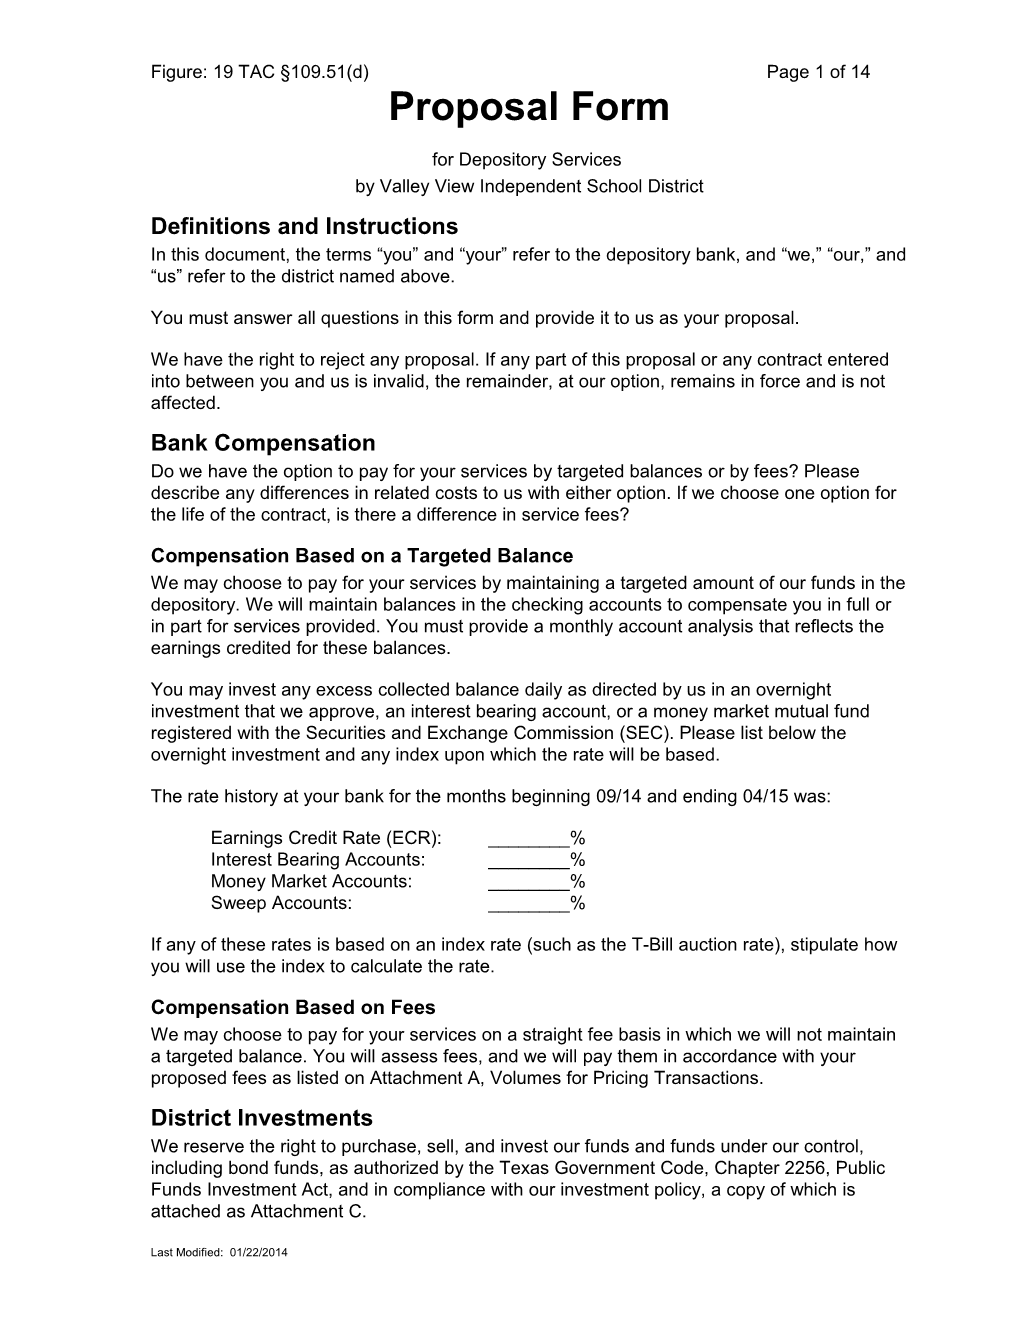 Proposal for Depository Services Page 2 of 15